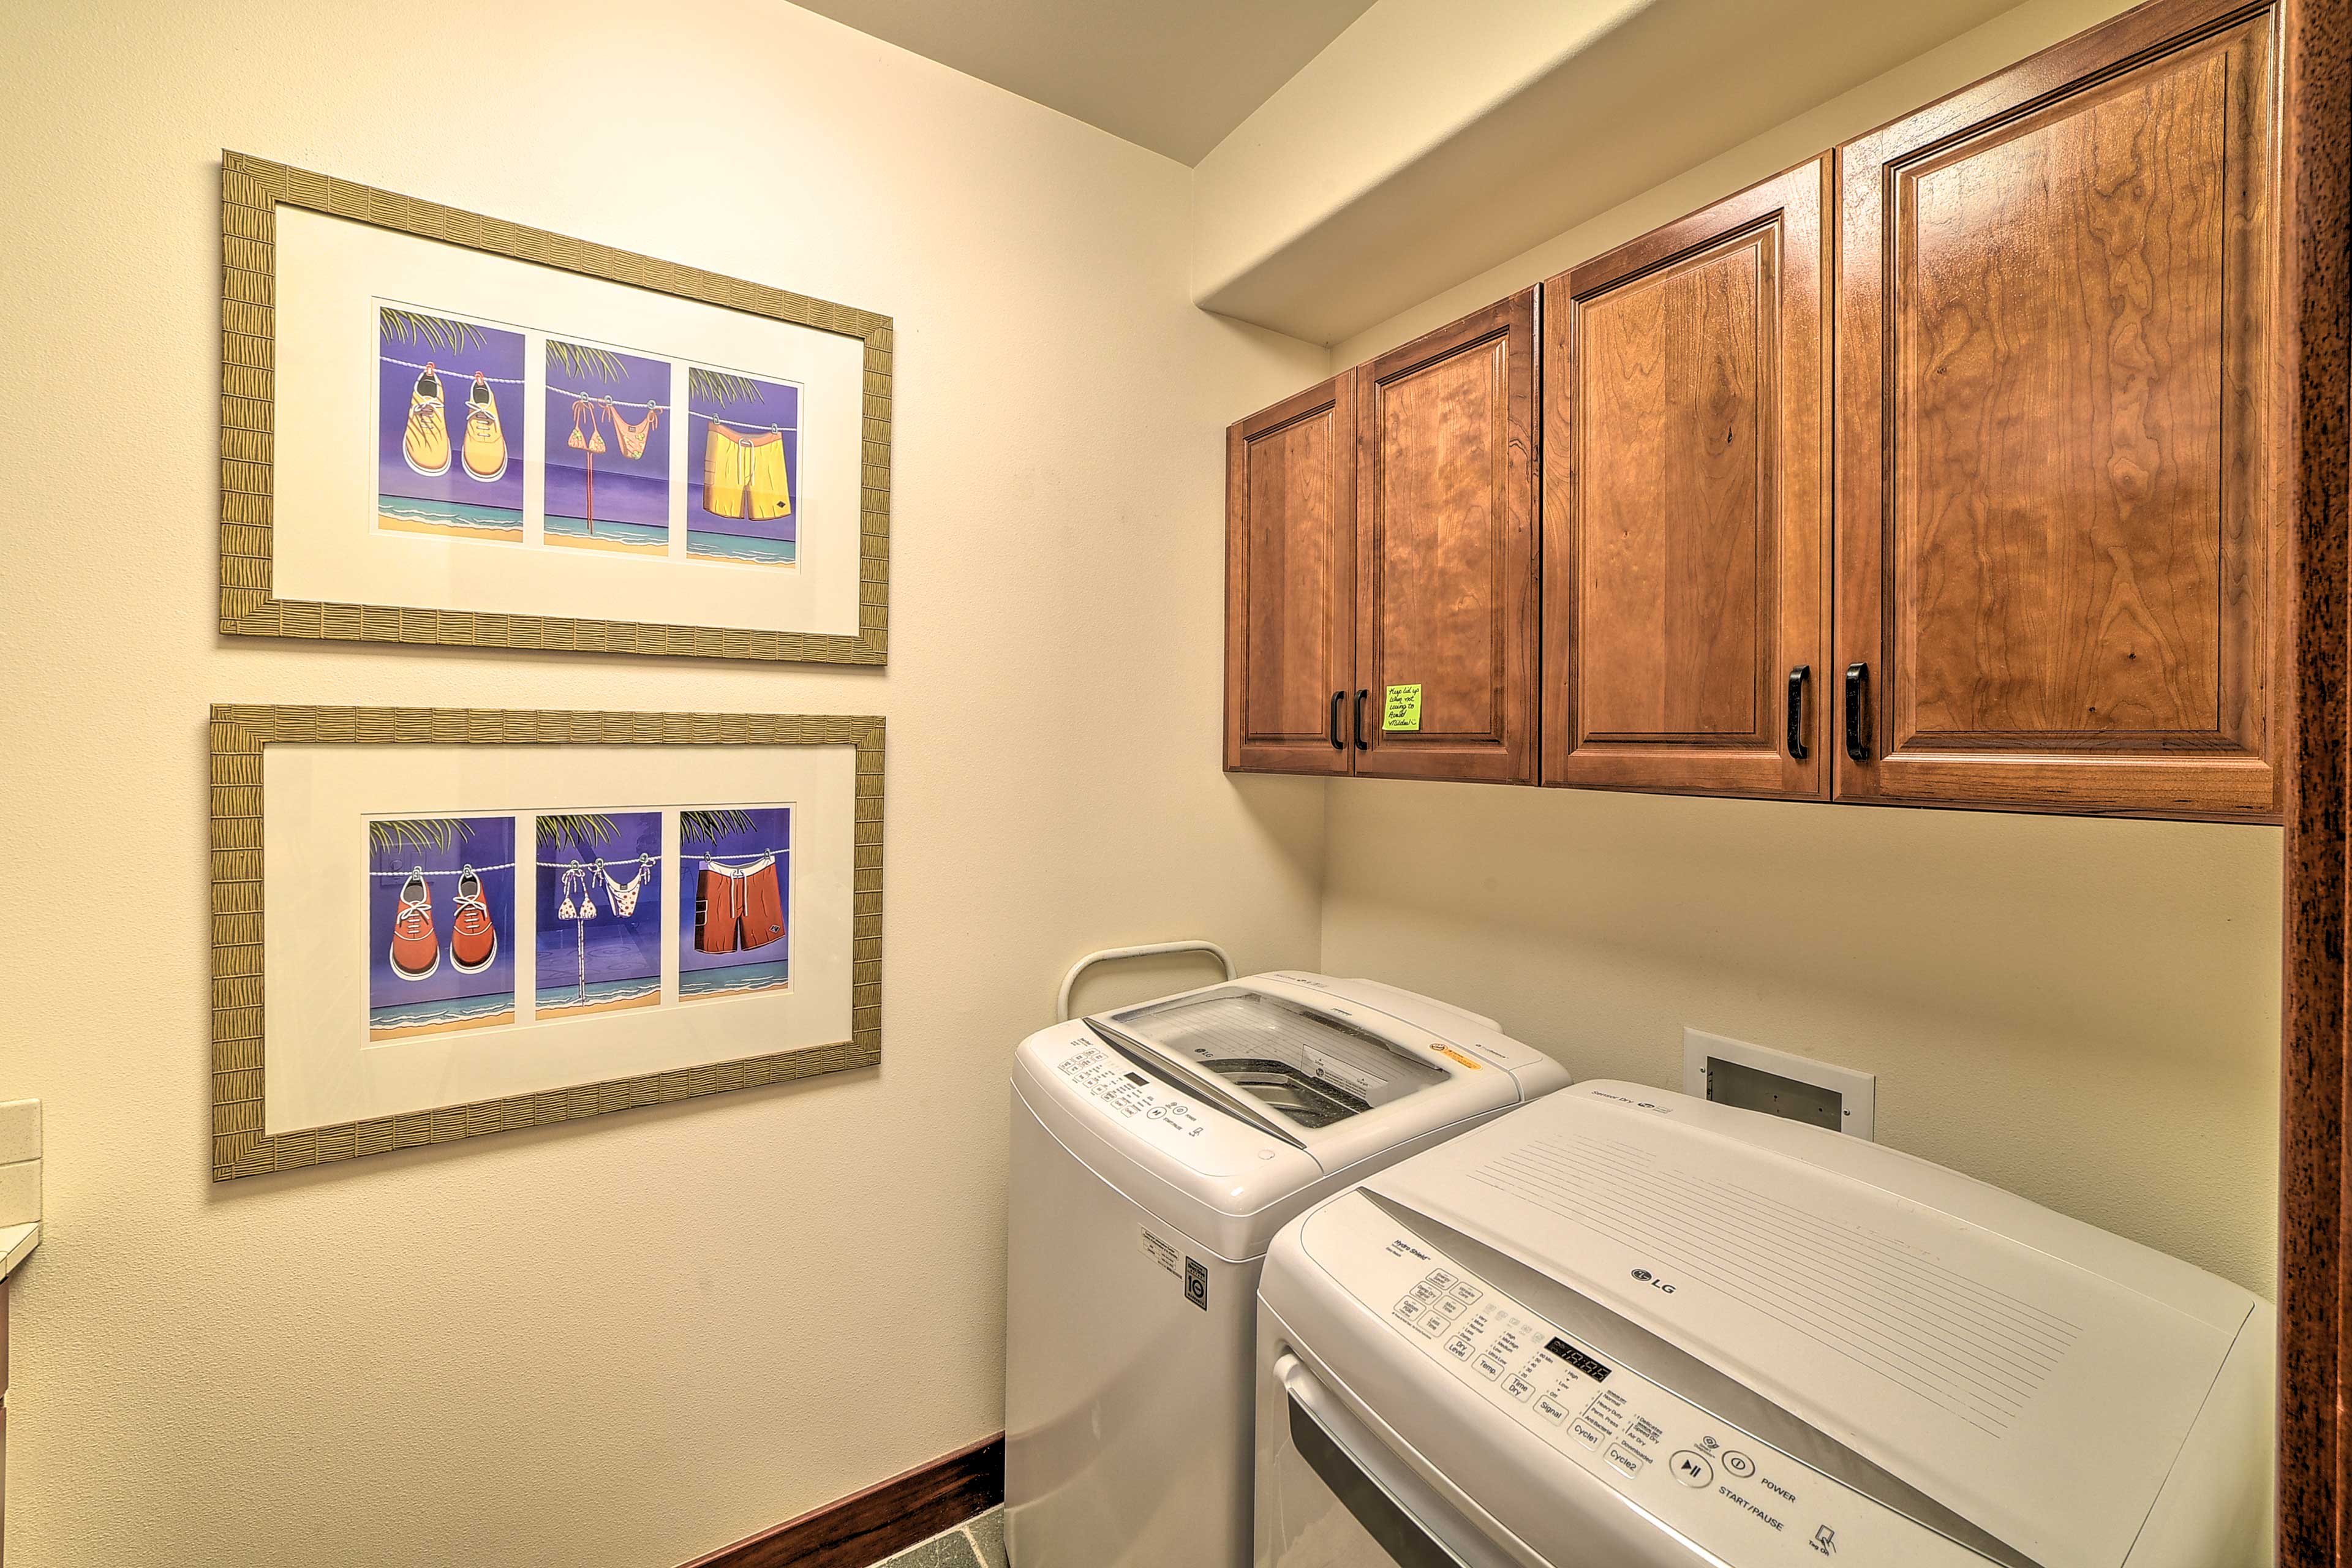 Laundry Room | 1st Floor | Laundry Detergent Provided | Iron/Board